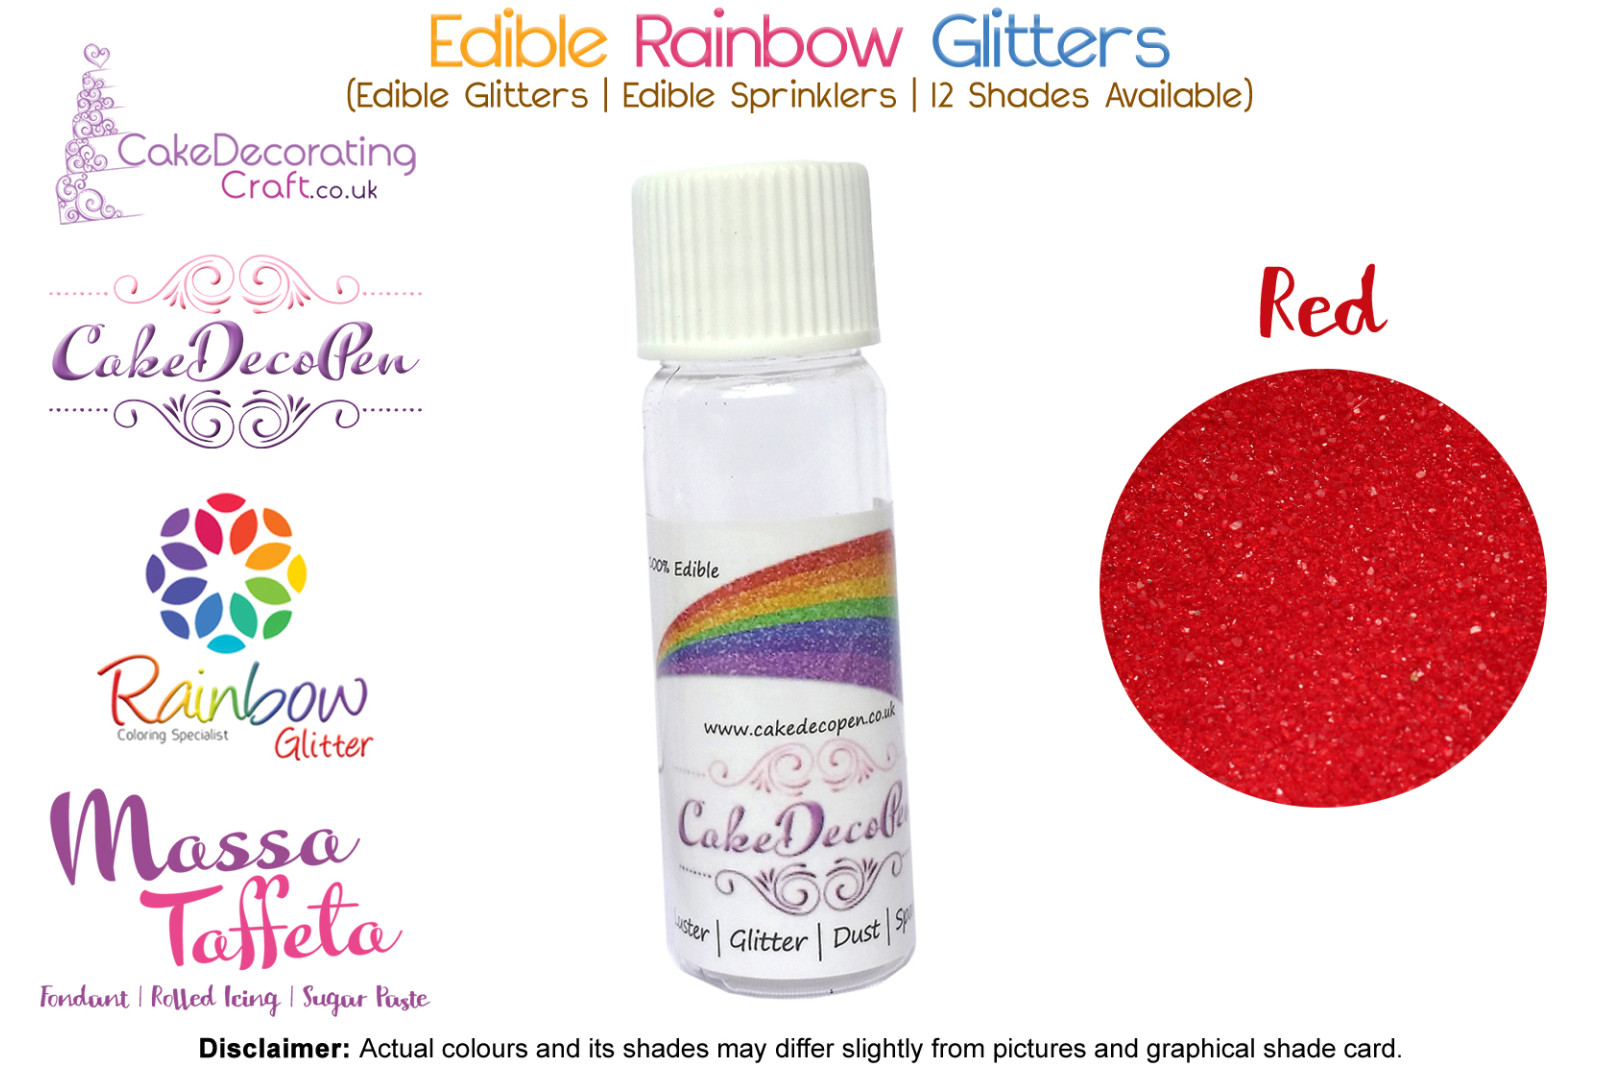 Red | Rainbow Glitter | Sprinklers | 100 % Edible | Cake Decorating Craft | 8 Grams | Great Christmas Bake Off